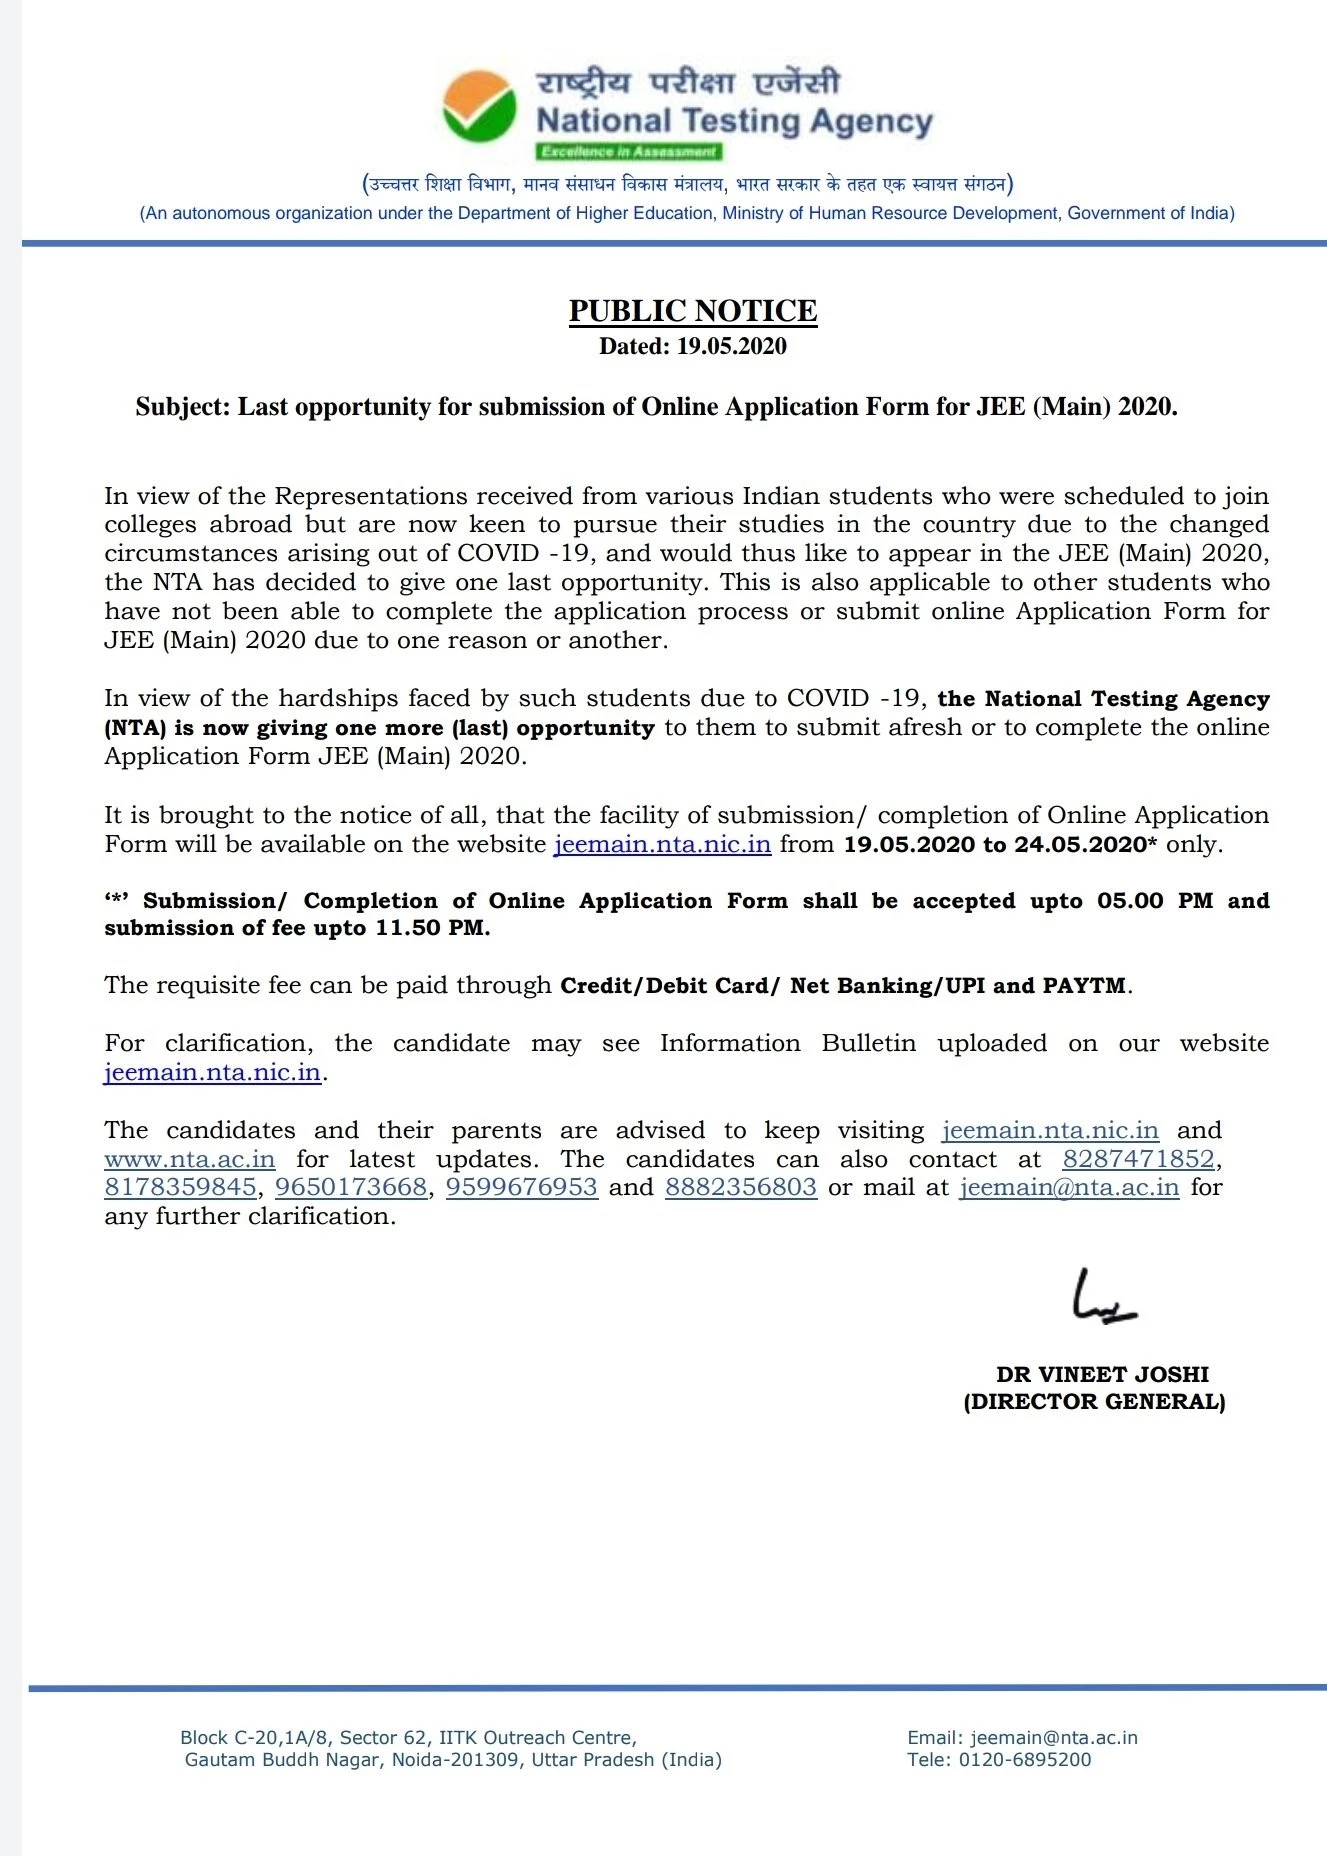 Official Public Notice as released by the NTA